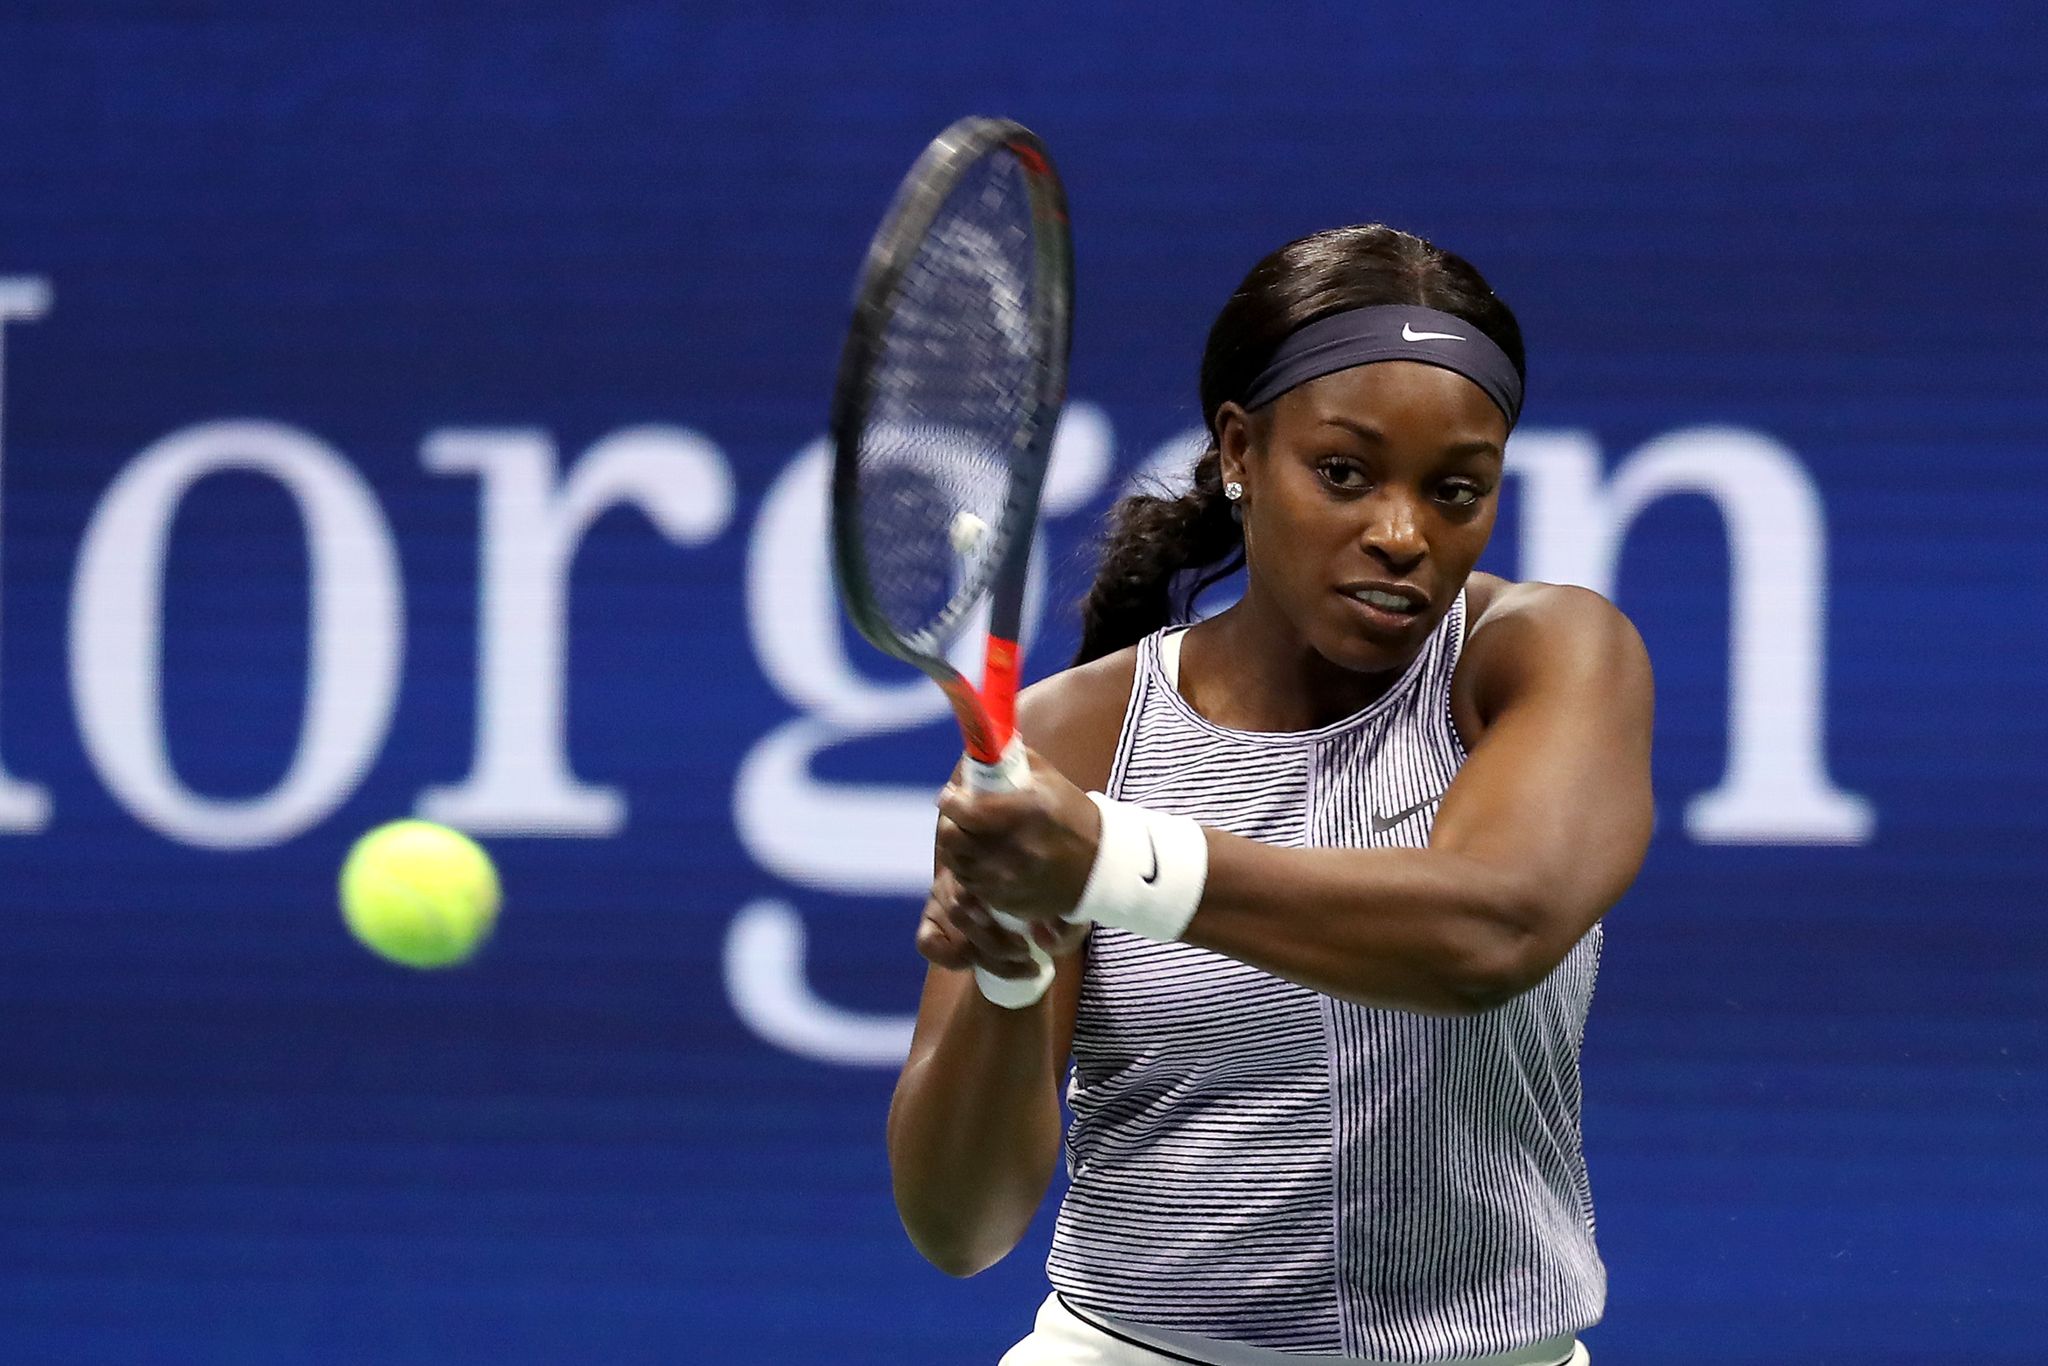 Sloane Stephens playing tennis at the 2019 US Open on August 27, 2019 in New York. | Photo: Getty Images